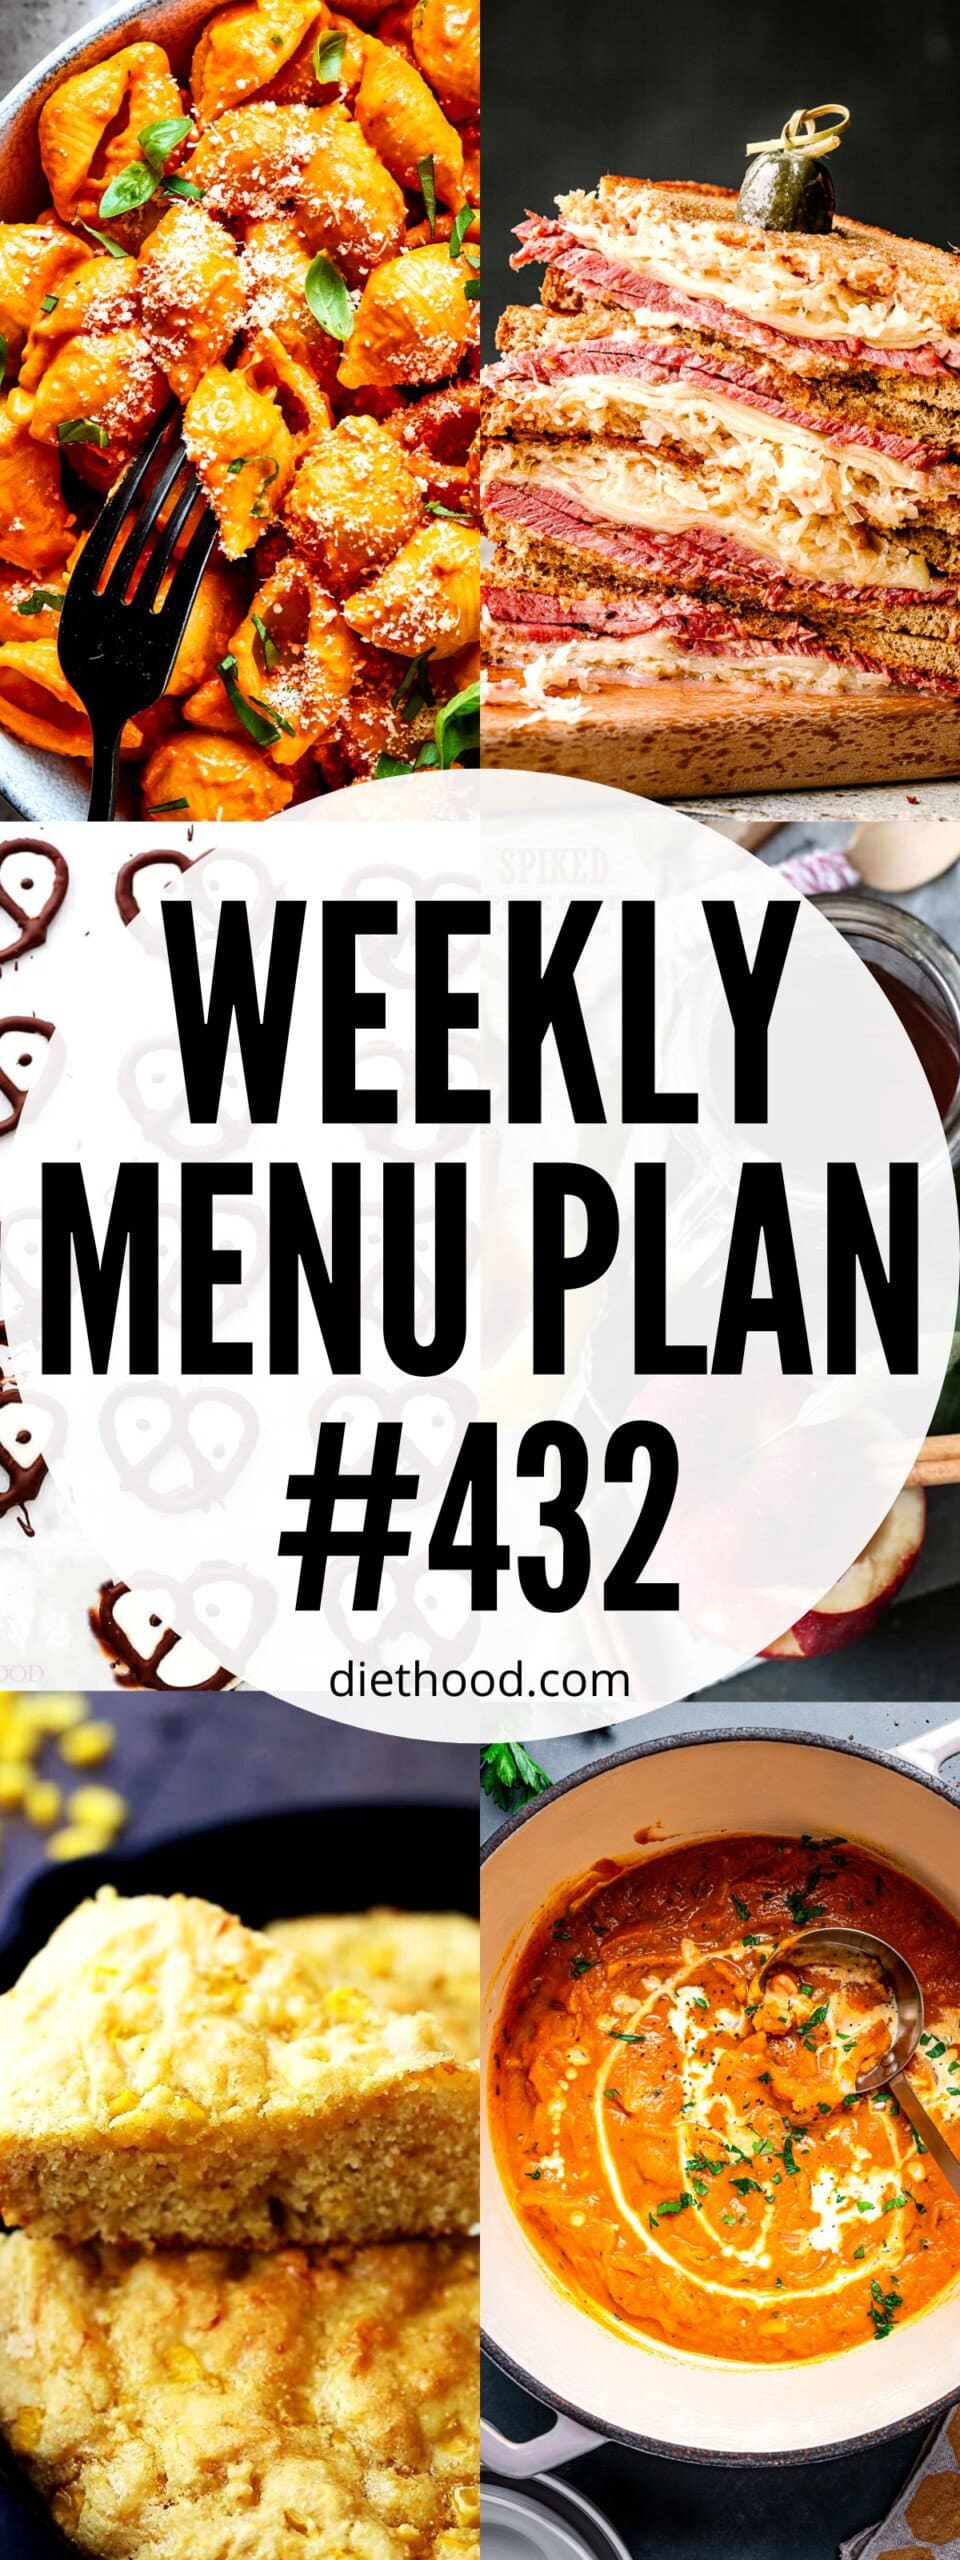 WEEKLY MENU PLAN 432 six pictures collage